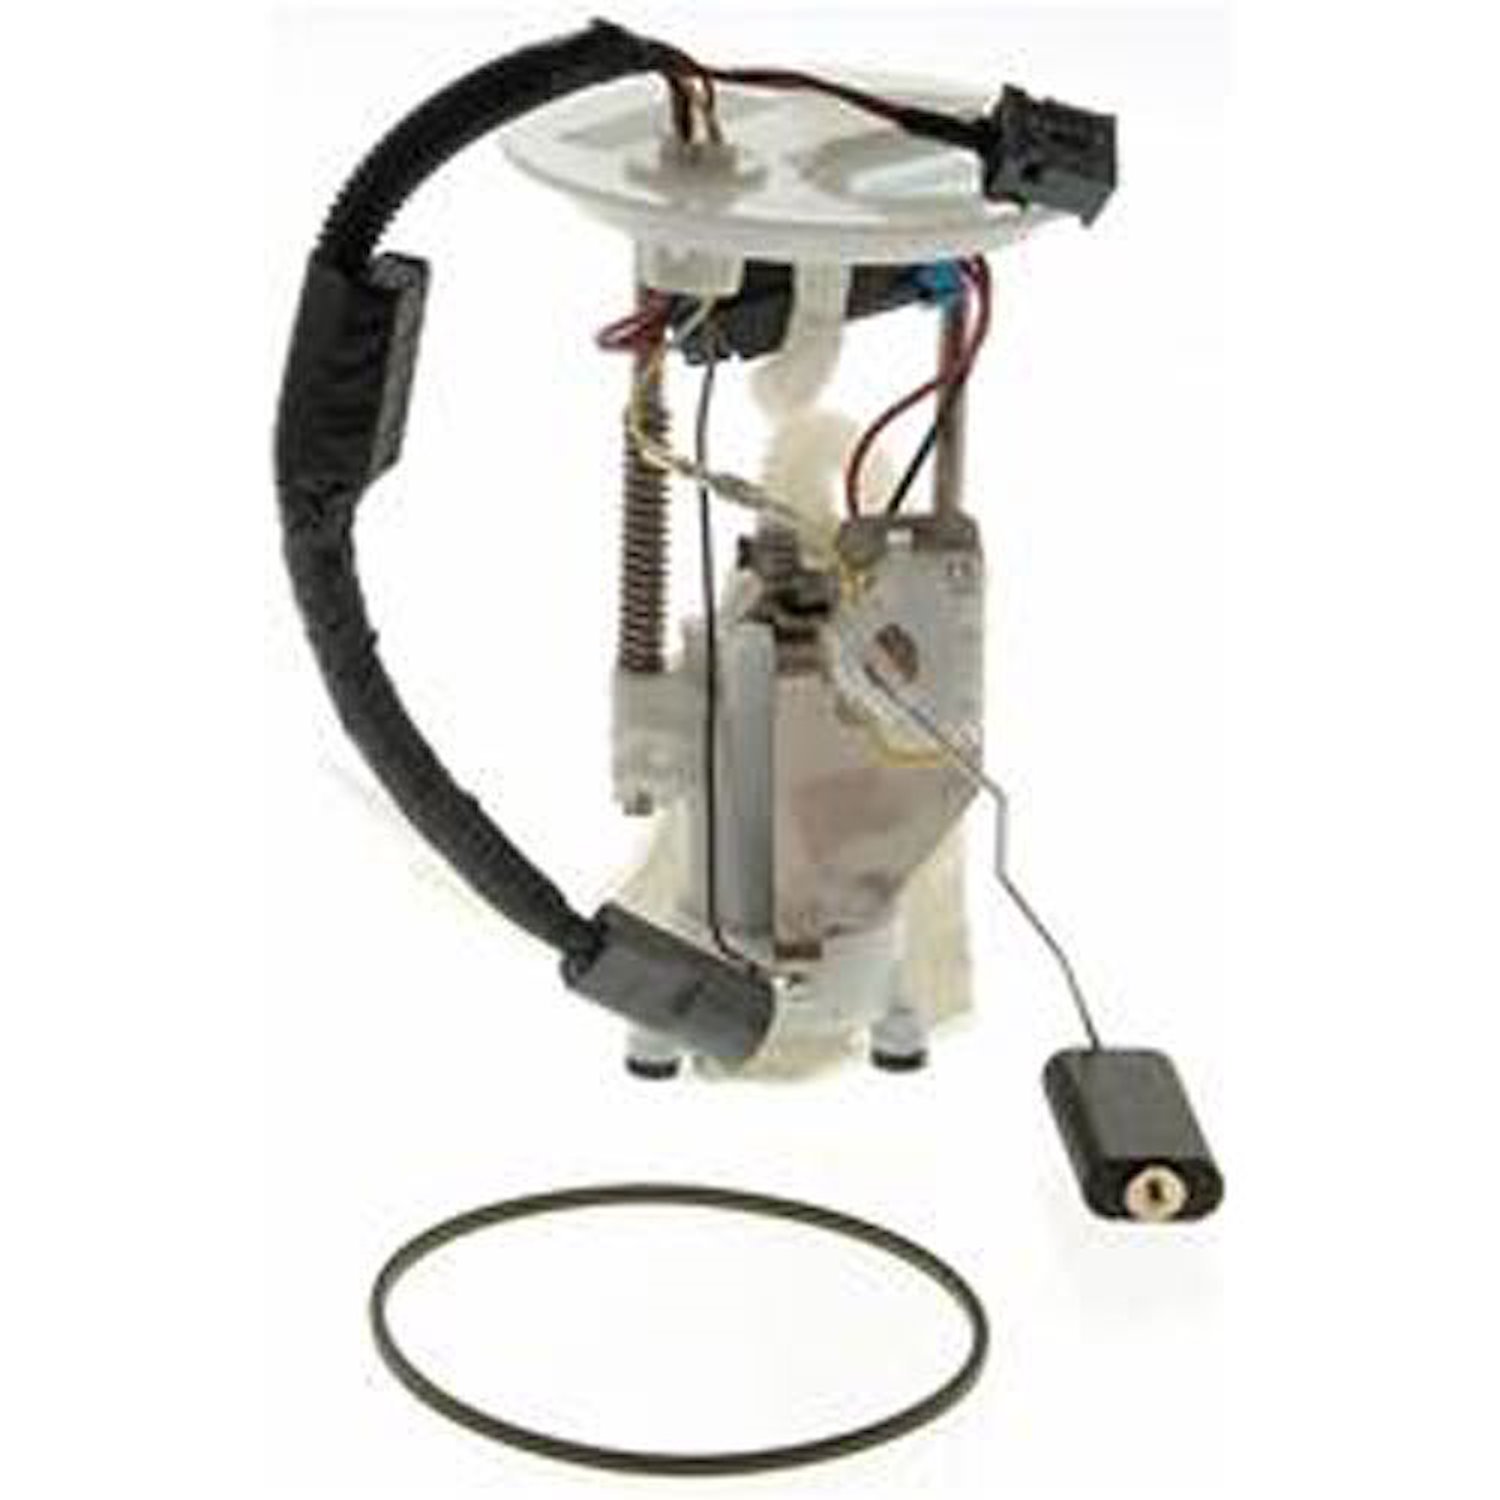 OE Ford Replacement Electric Fuel Pump Module Assembly 2003-04 Ford Explorer 4.0L V6